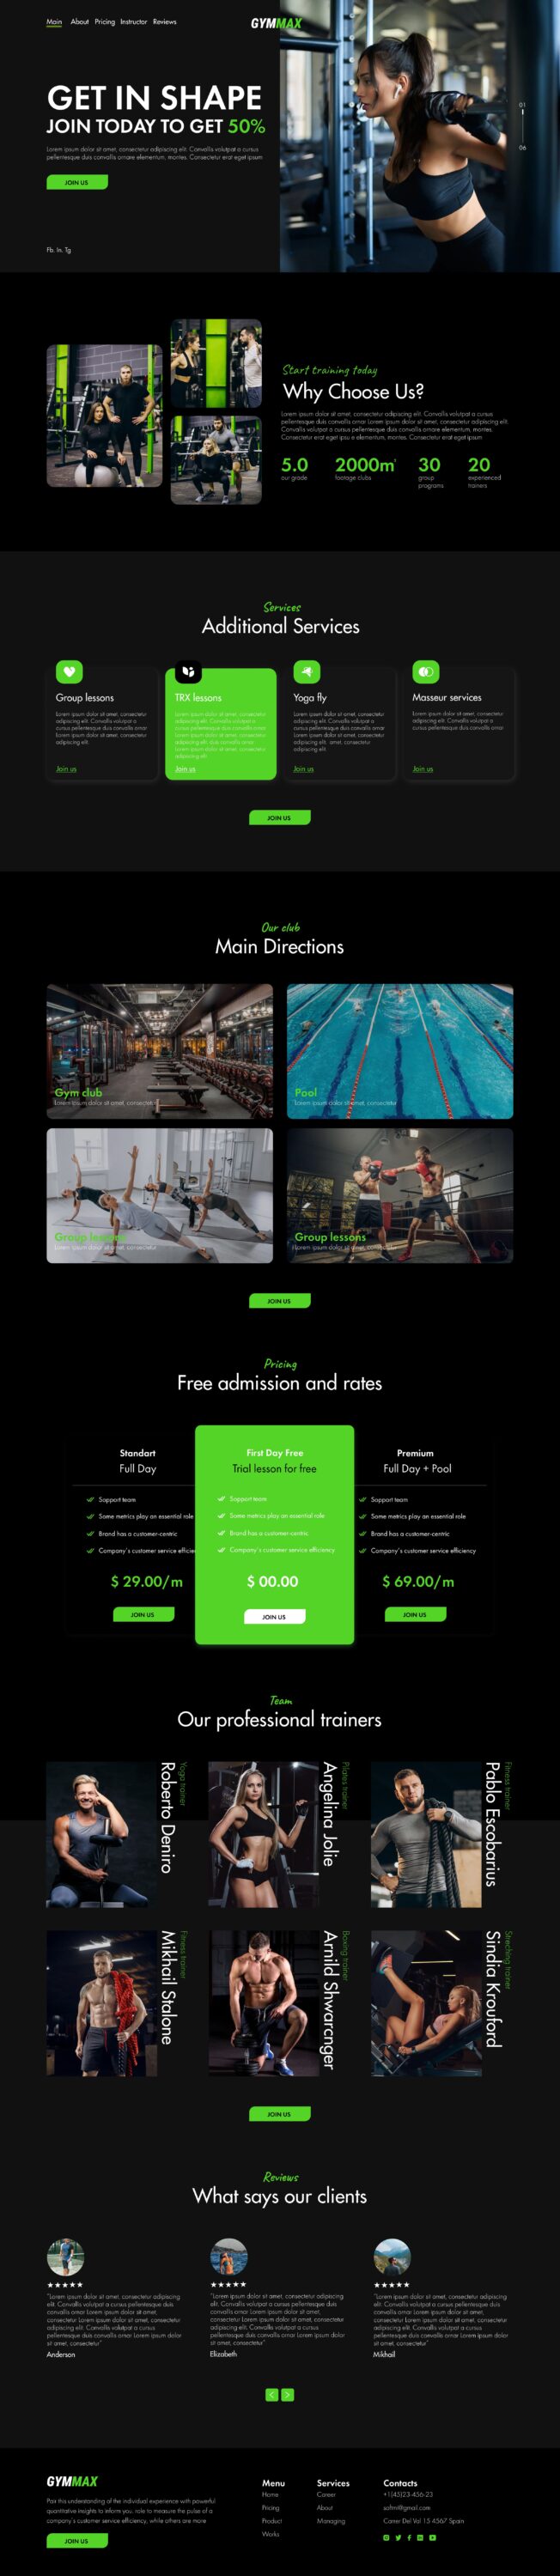 Dark template for gym with the green accents.